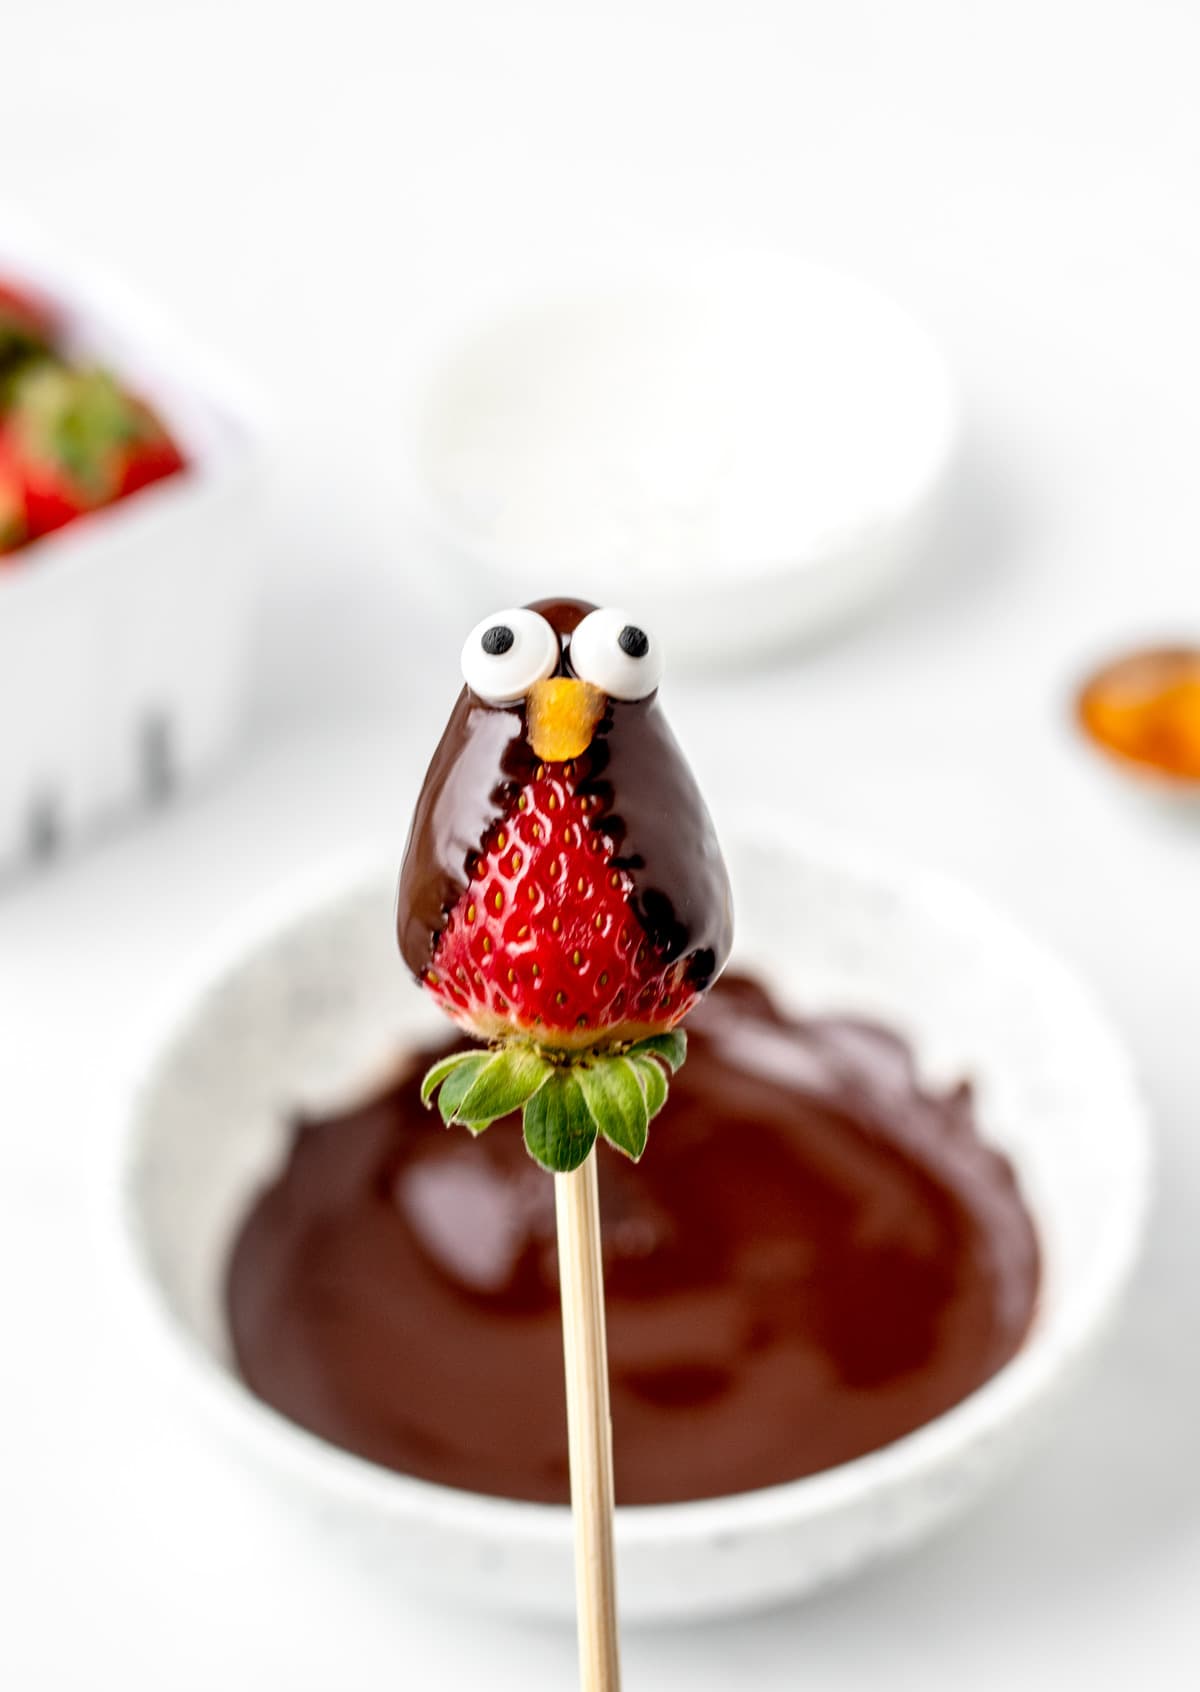 A chocolate covered strawberry on a wooden skewer with the candy eyes and dried apricot beak.